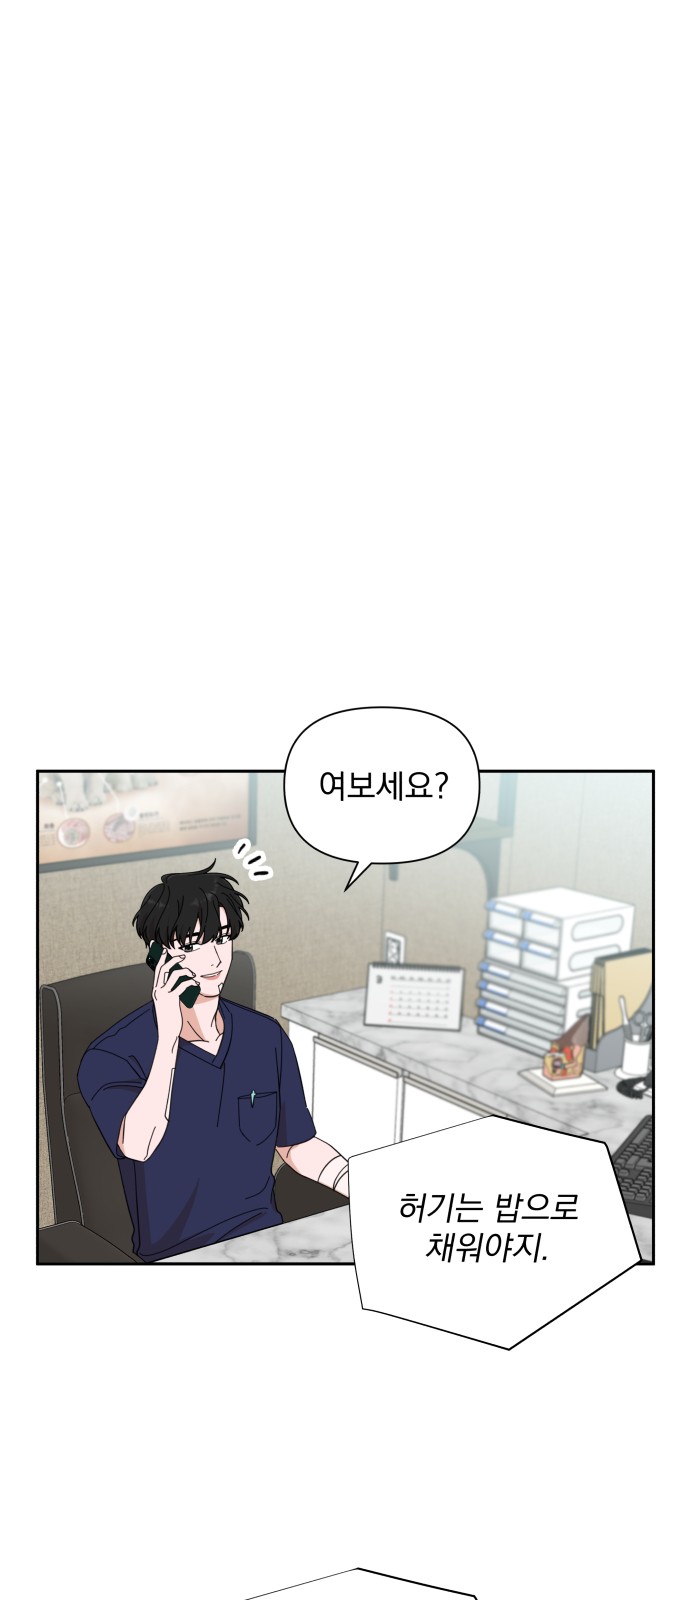 The Man With Pretty Lips - Chapter 16 - Page 3